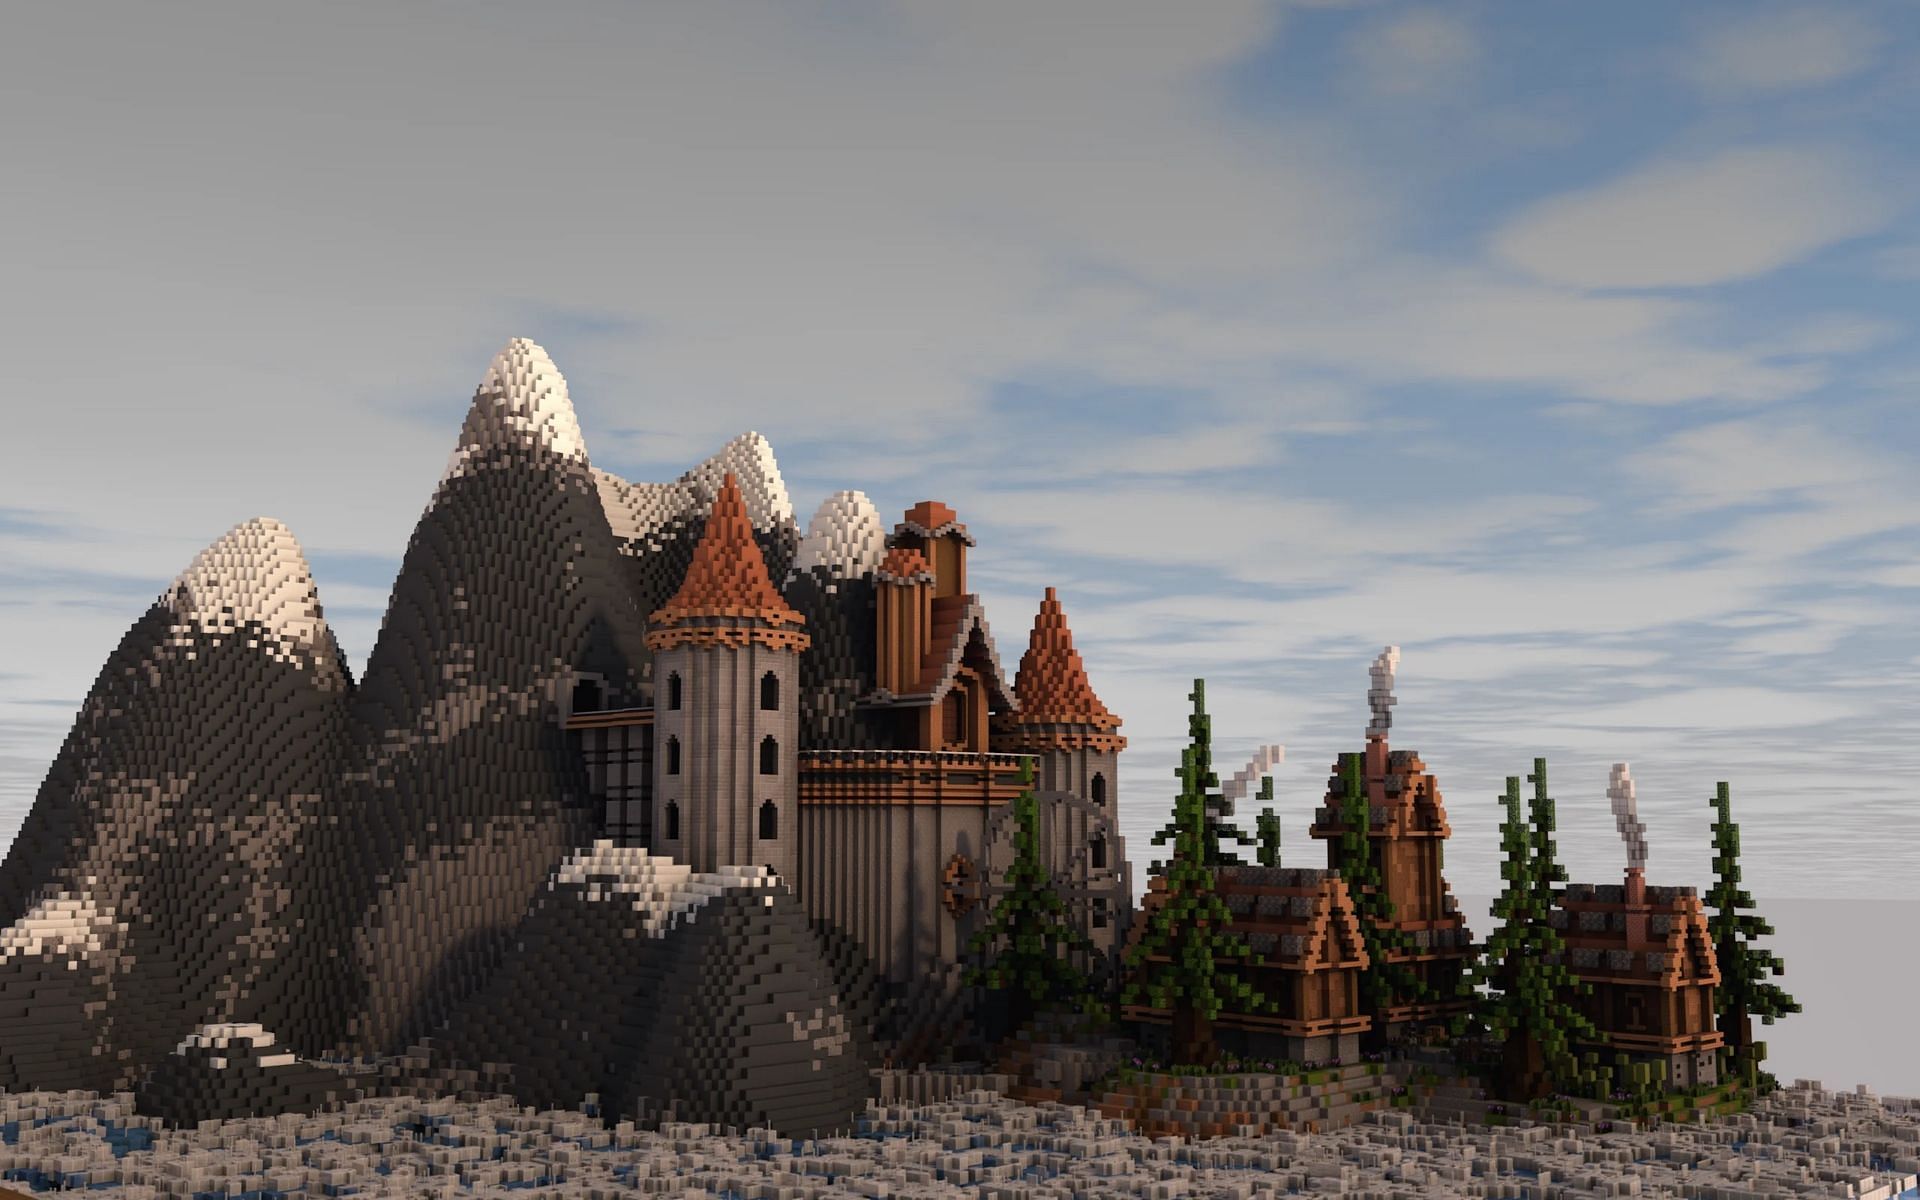 For those who want to get away from the world and have the ultimate protection, this castle is a great choice (Image via Planet Minecraft)